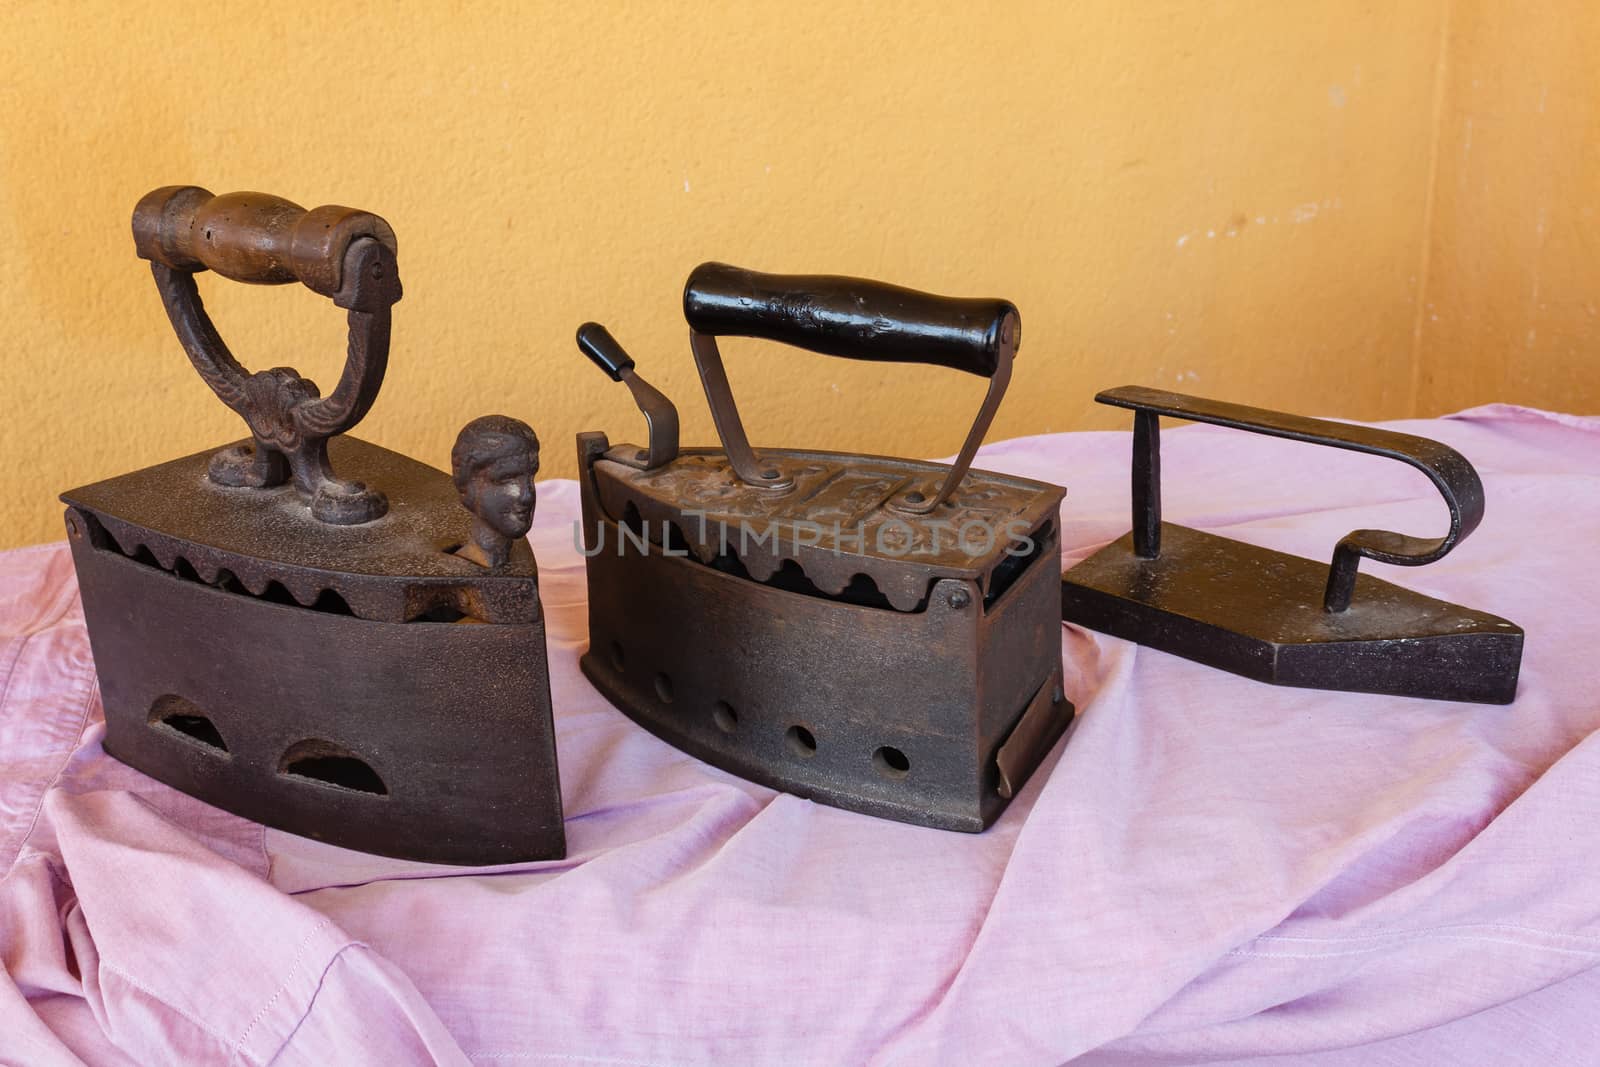 three old irons  made of cast-iron   on a shirt